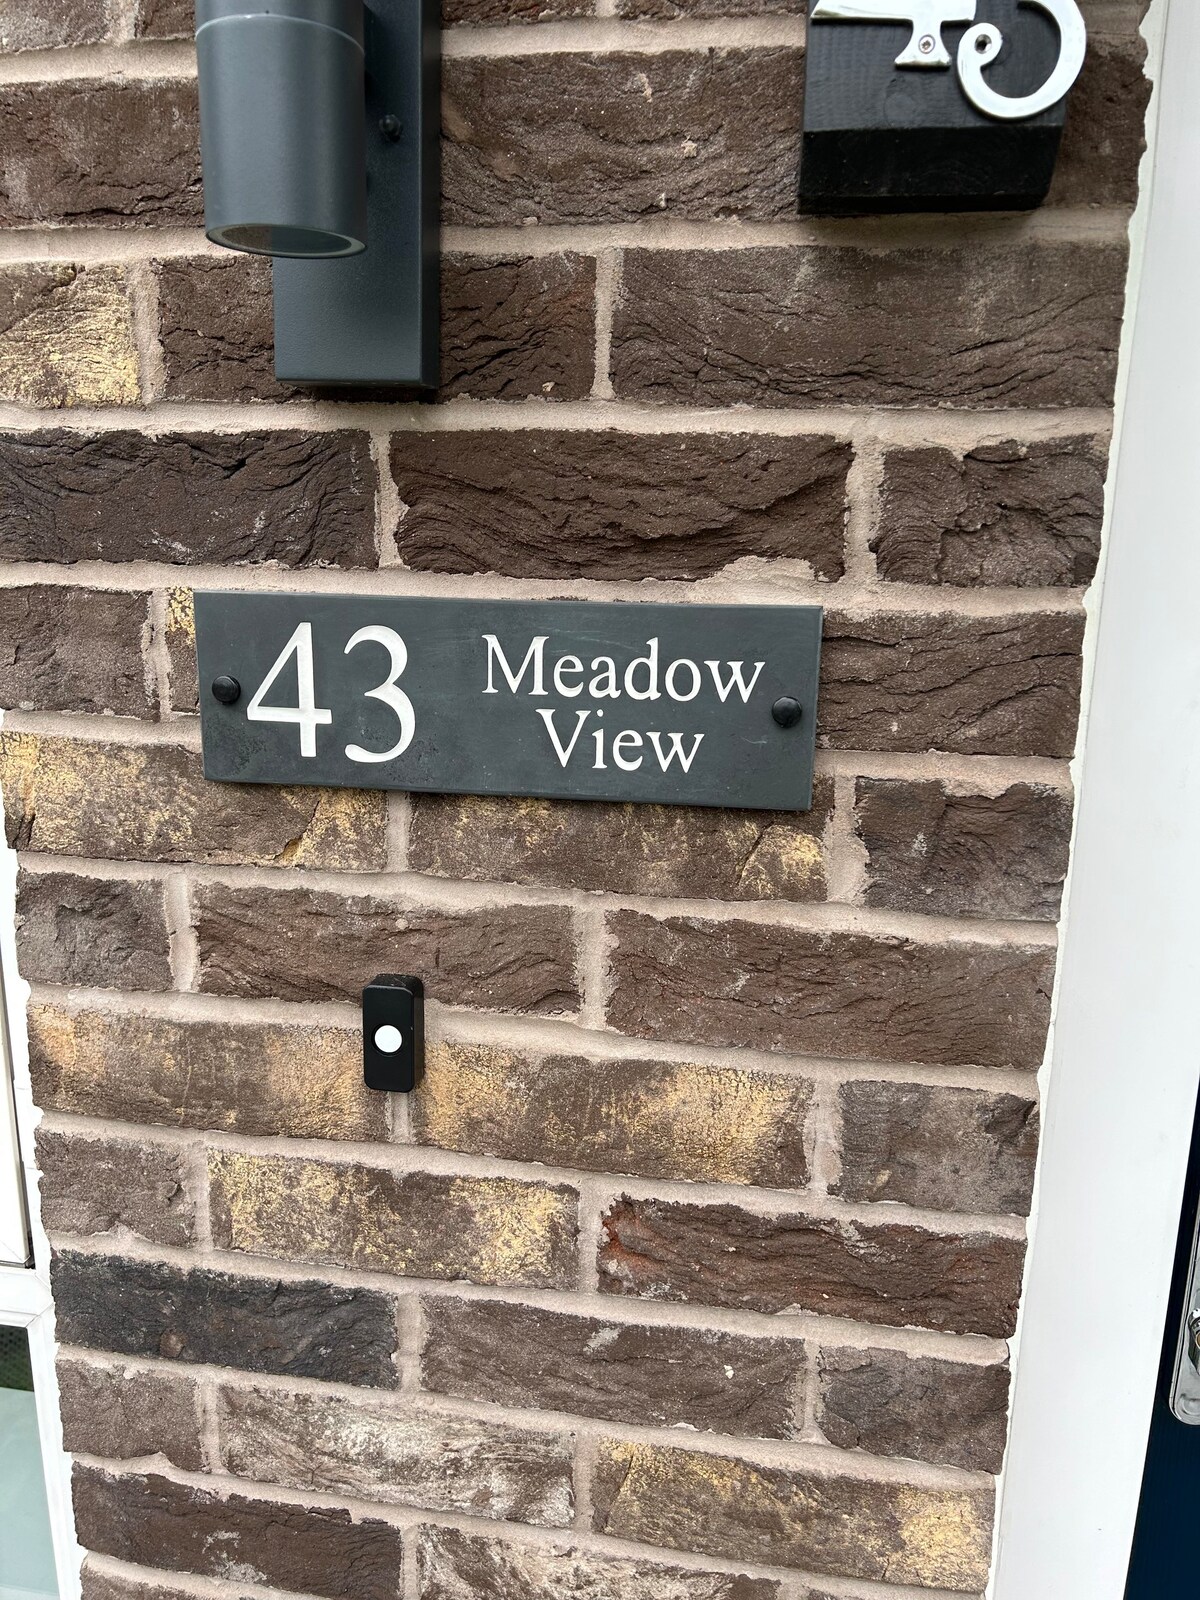 Meadow View